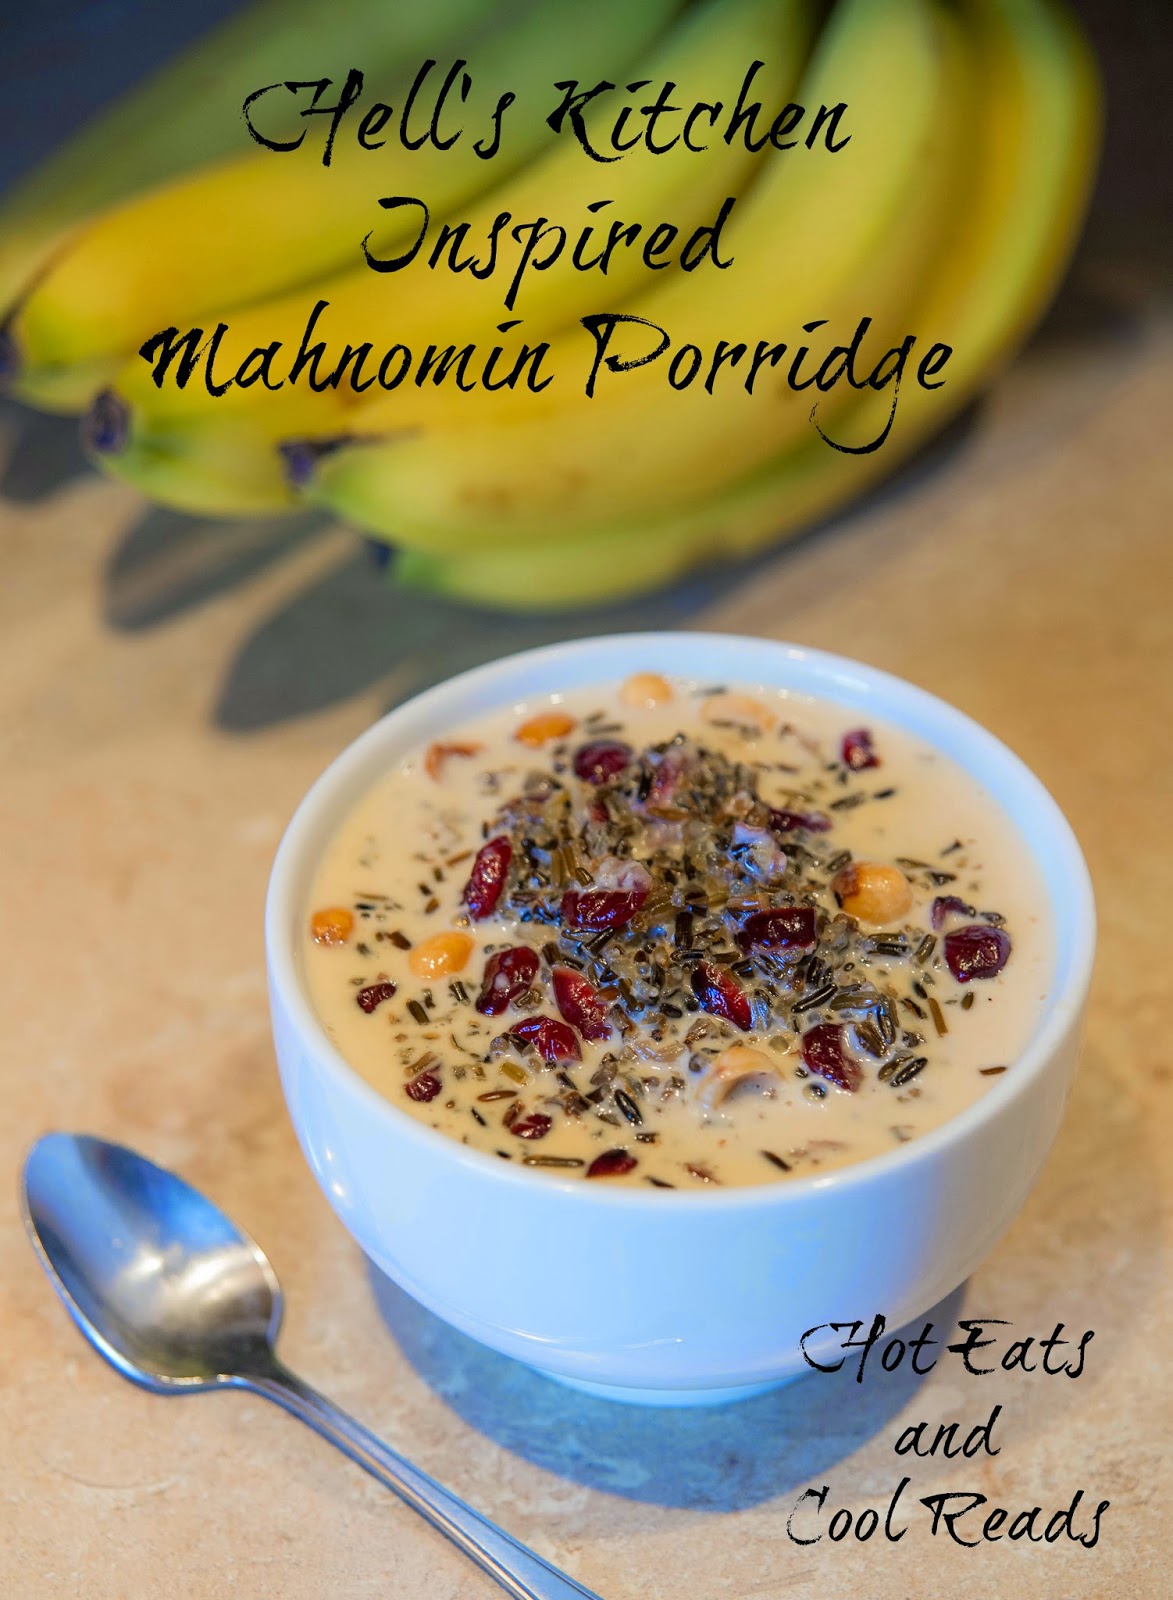 Pure Minnesota comfort food breakfast! Hell's Kitchen Inspired Mahnomin Porridge from Hot Eats and Cool Reads!